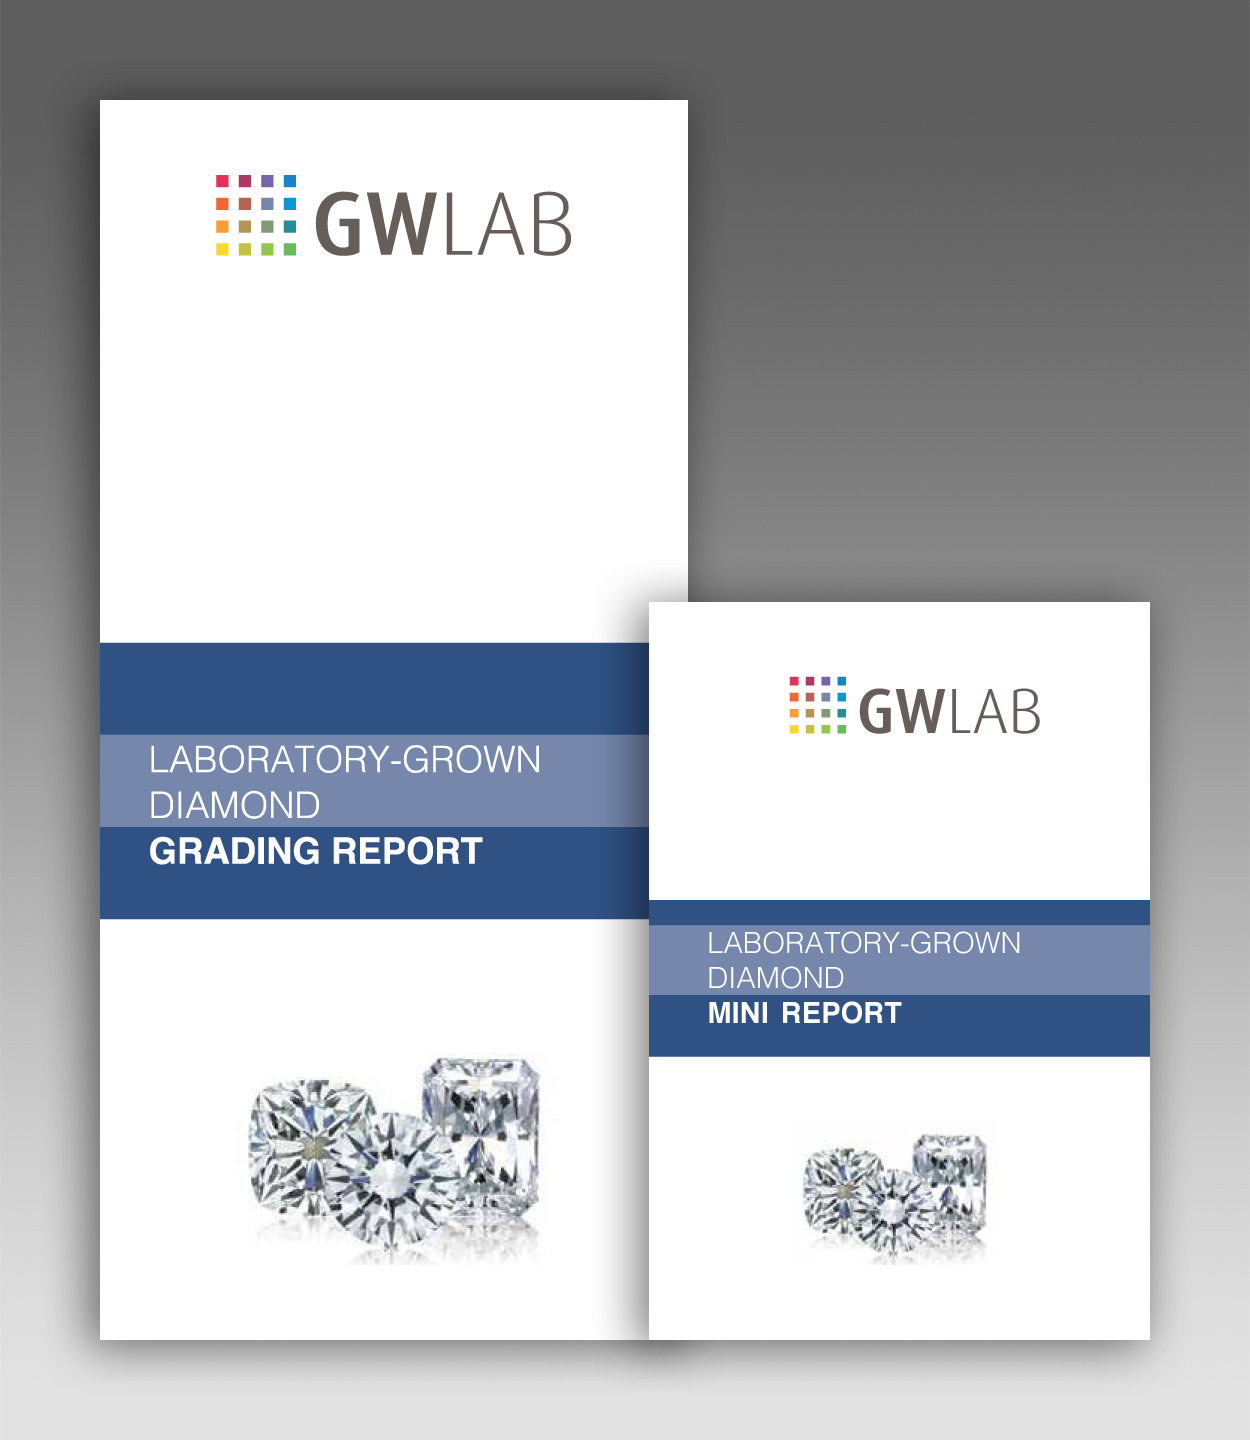 GWLAB Laboratory-Grown Diamond Grading Report - Outer Cover